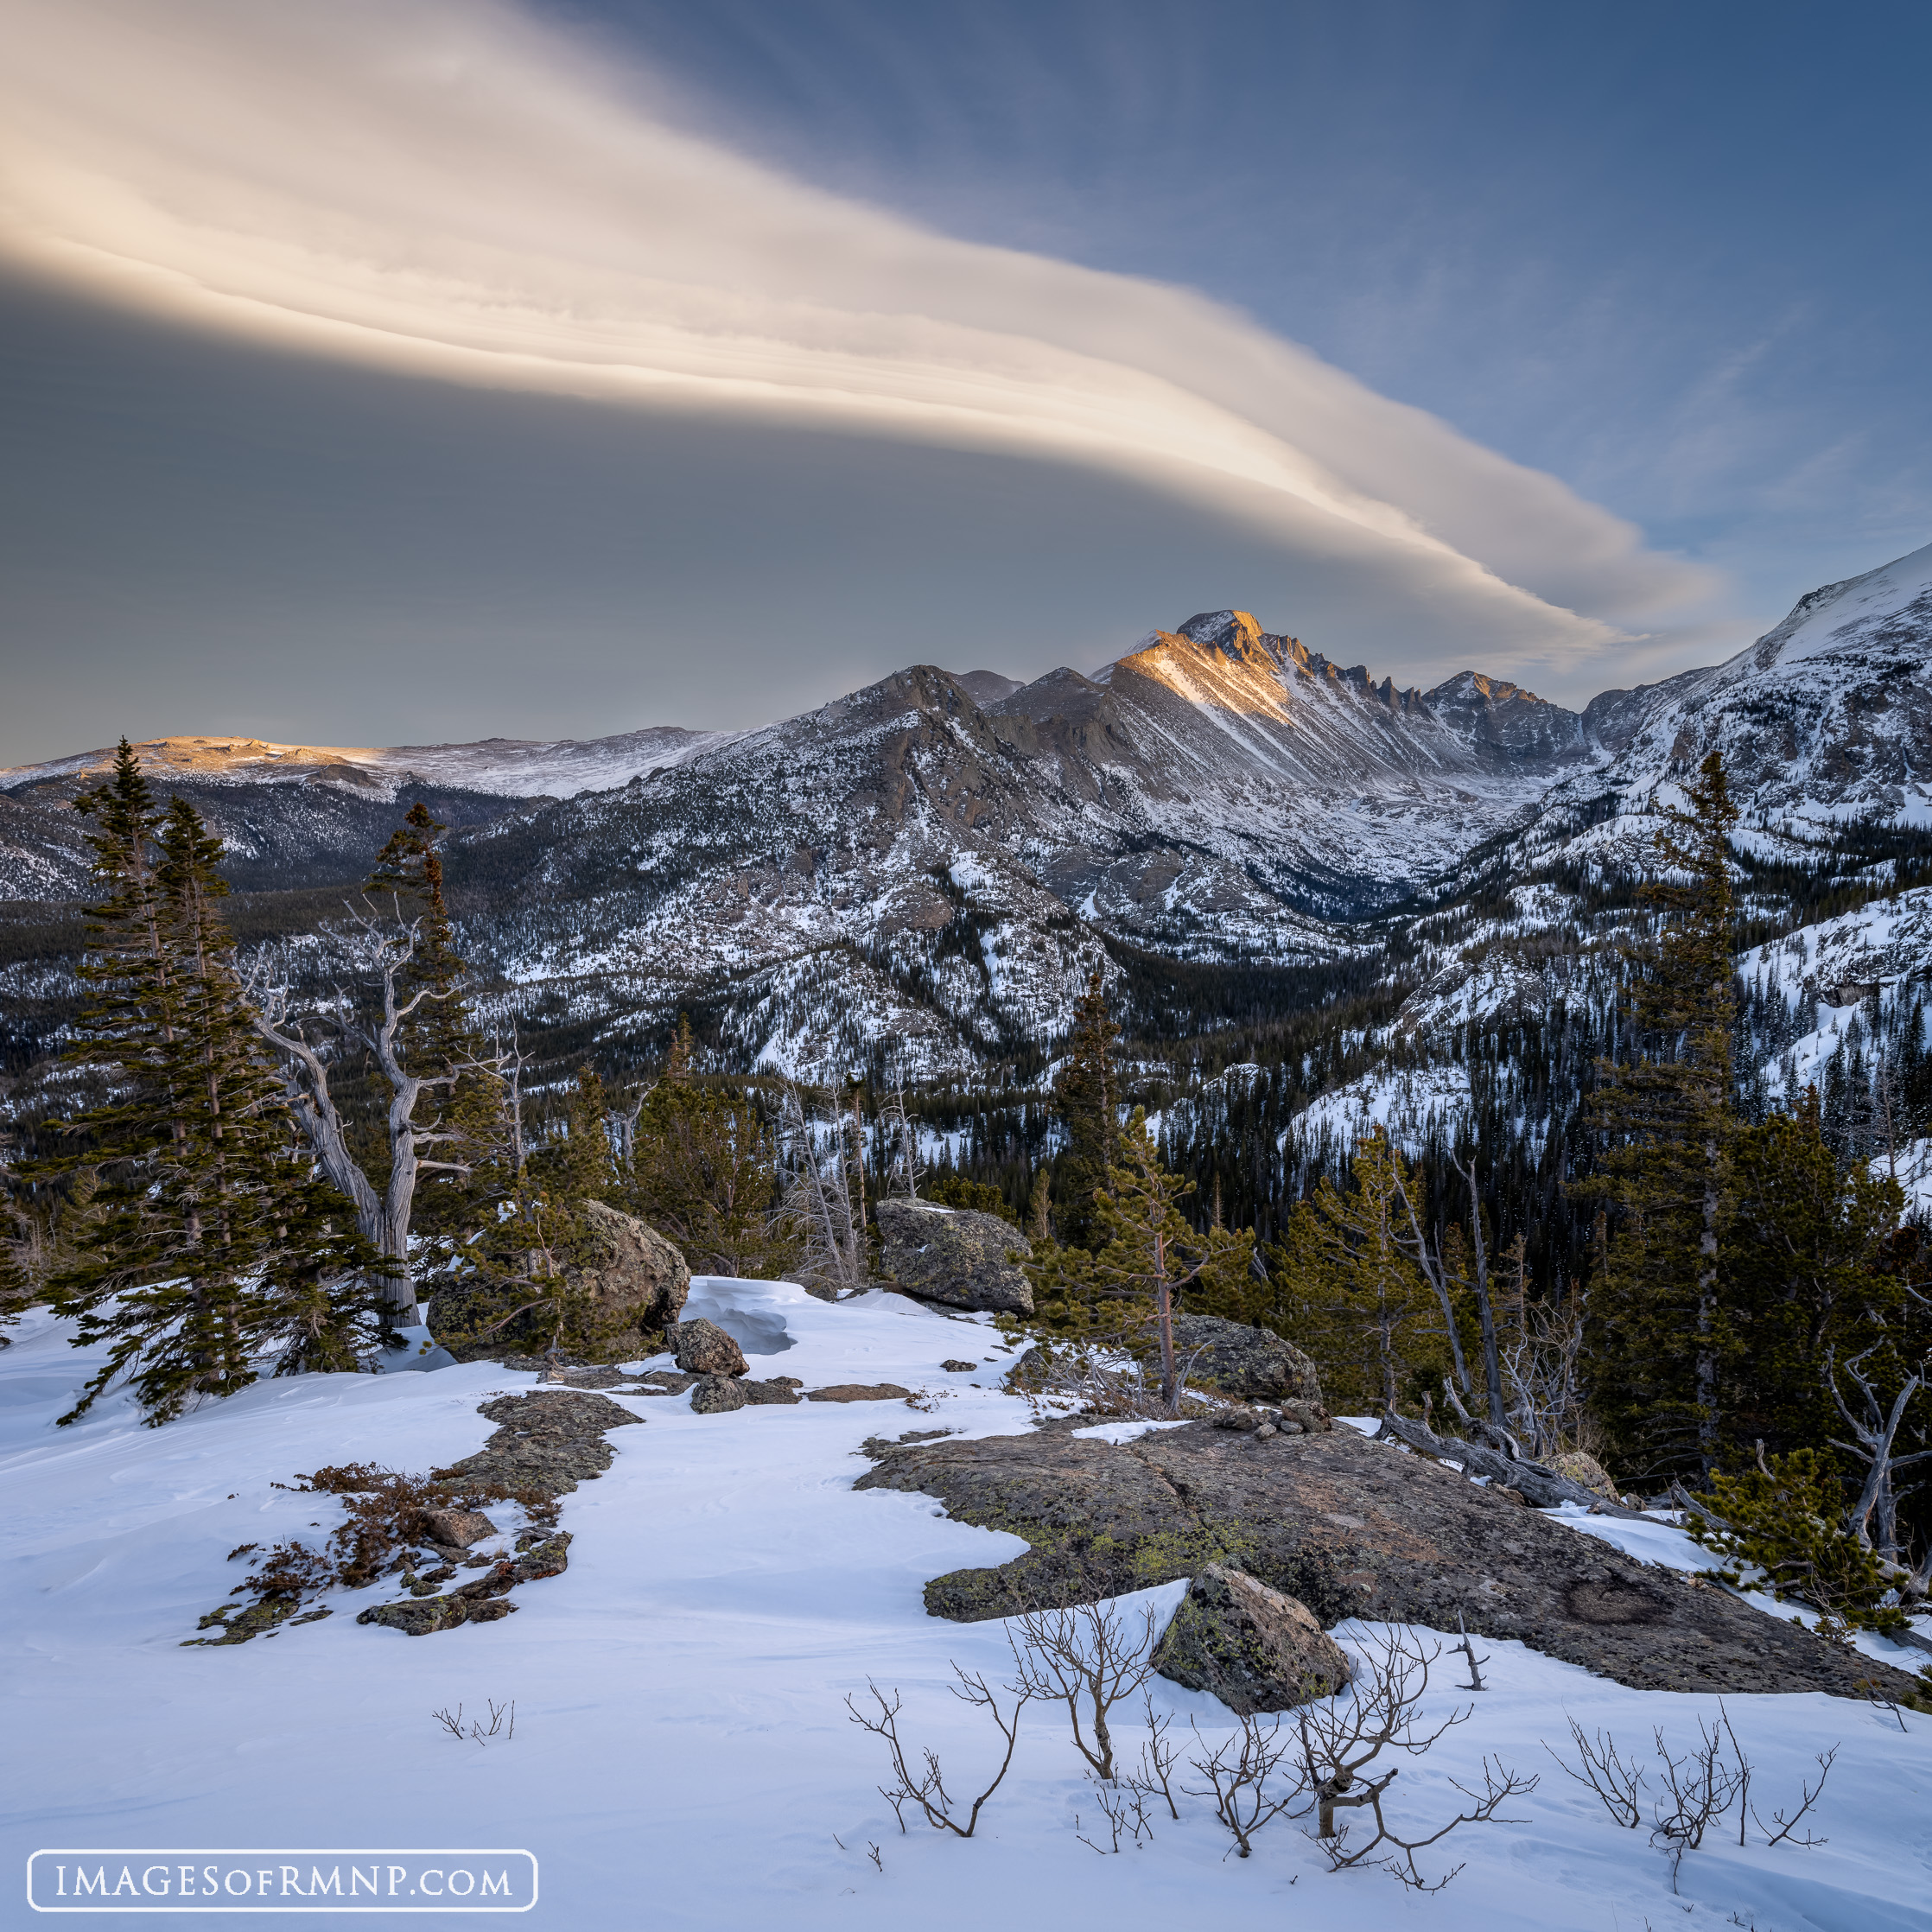 A beautiful lenticular cloud rested over Longs Peak and Glacier Gorge on this February evening. As the sun set, it illuminated...